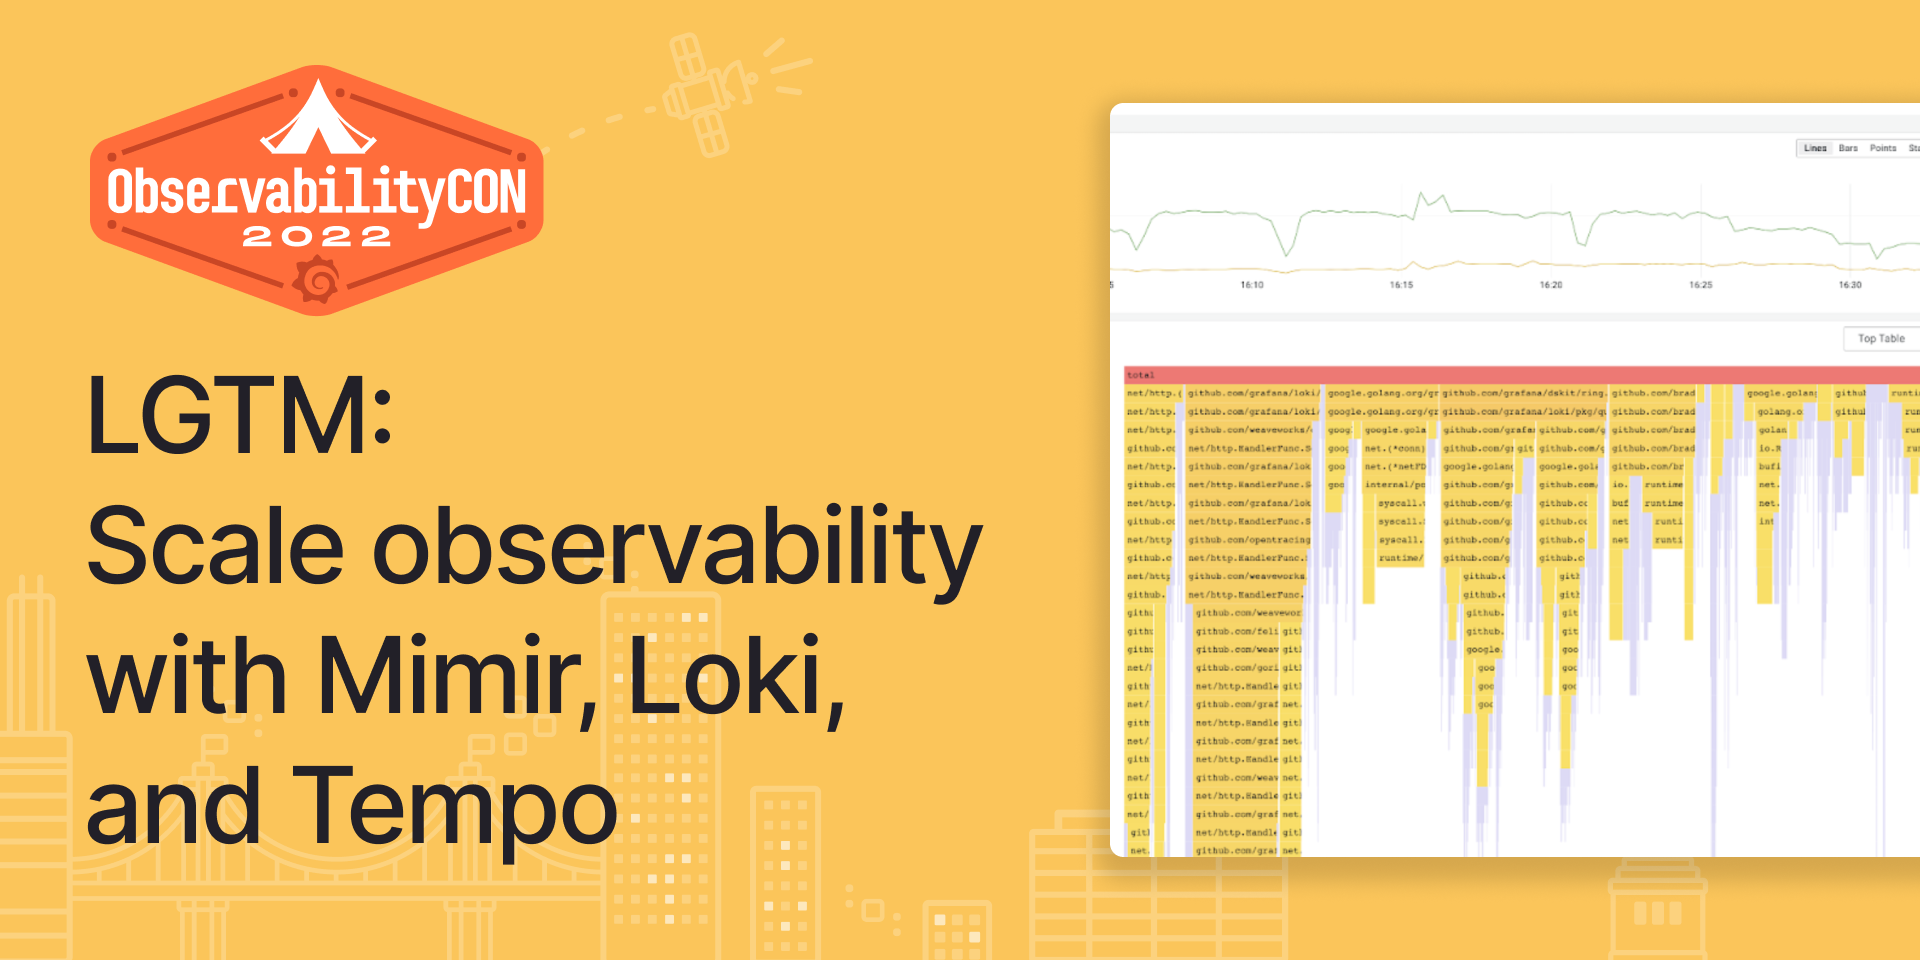 LGTM: Scale observability with Mimir, Loki, and Tempo
